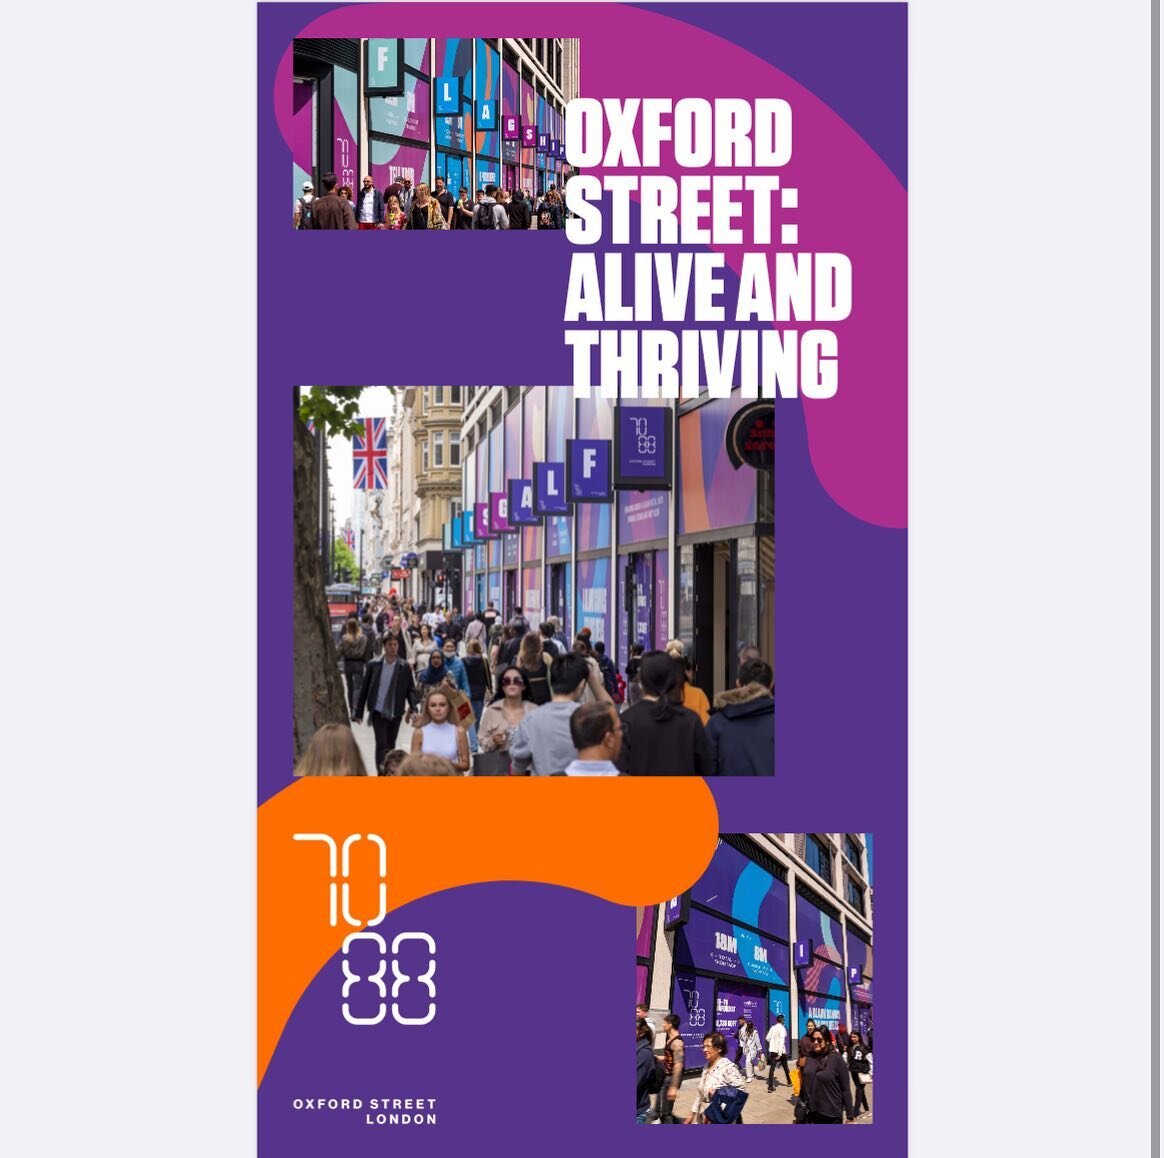 Oxford Street: Alive and Thriving!

Please contact David Kenningham or Mark Serrell for further information, or alternatively Richard Scott or Andrew Bond at Nashbond. 

#oxfordstreet #retail #flagship #westend #crossrail